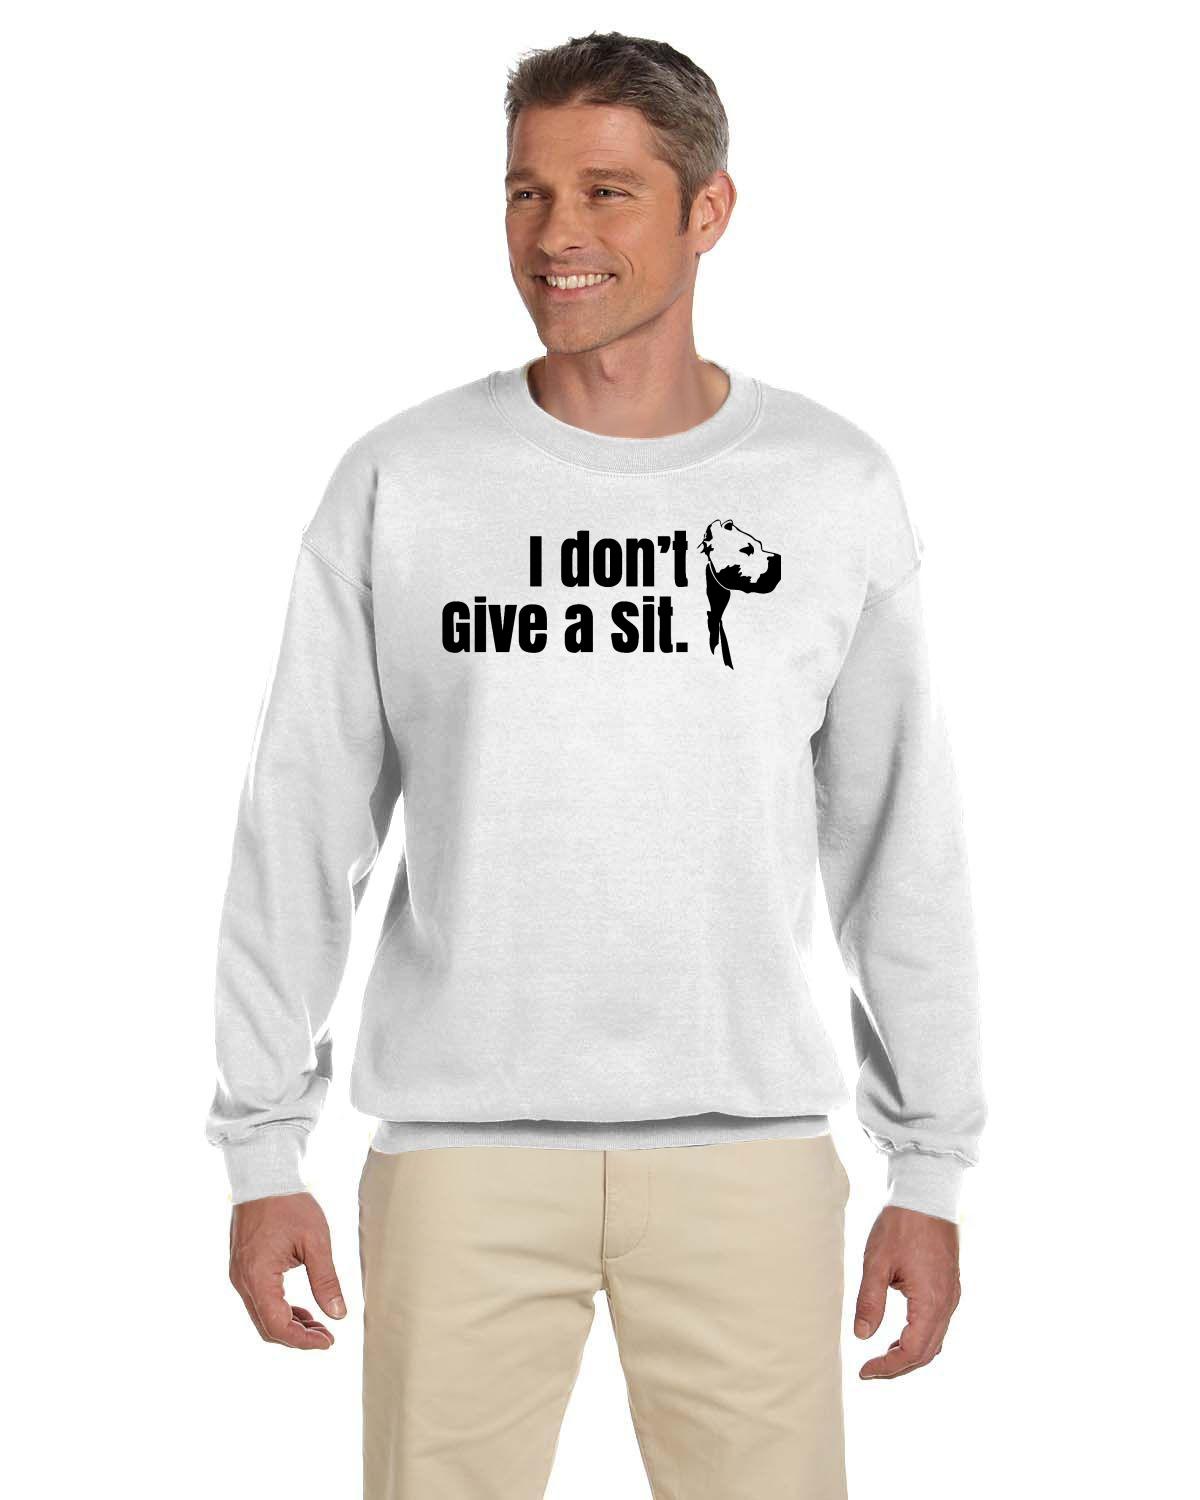 CDAC "I Don't Give A Sit" Adult Crewneck Sweater Light colours